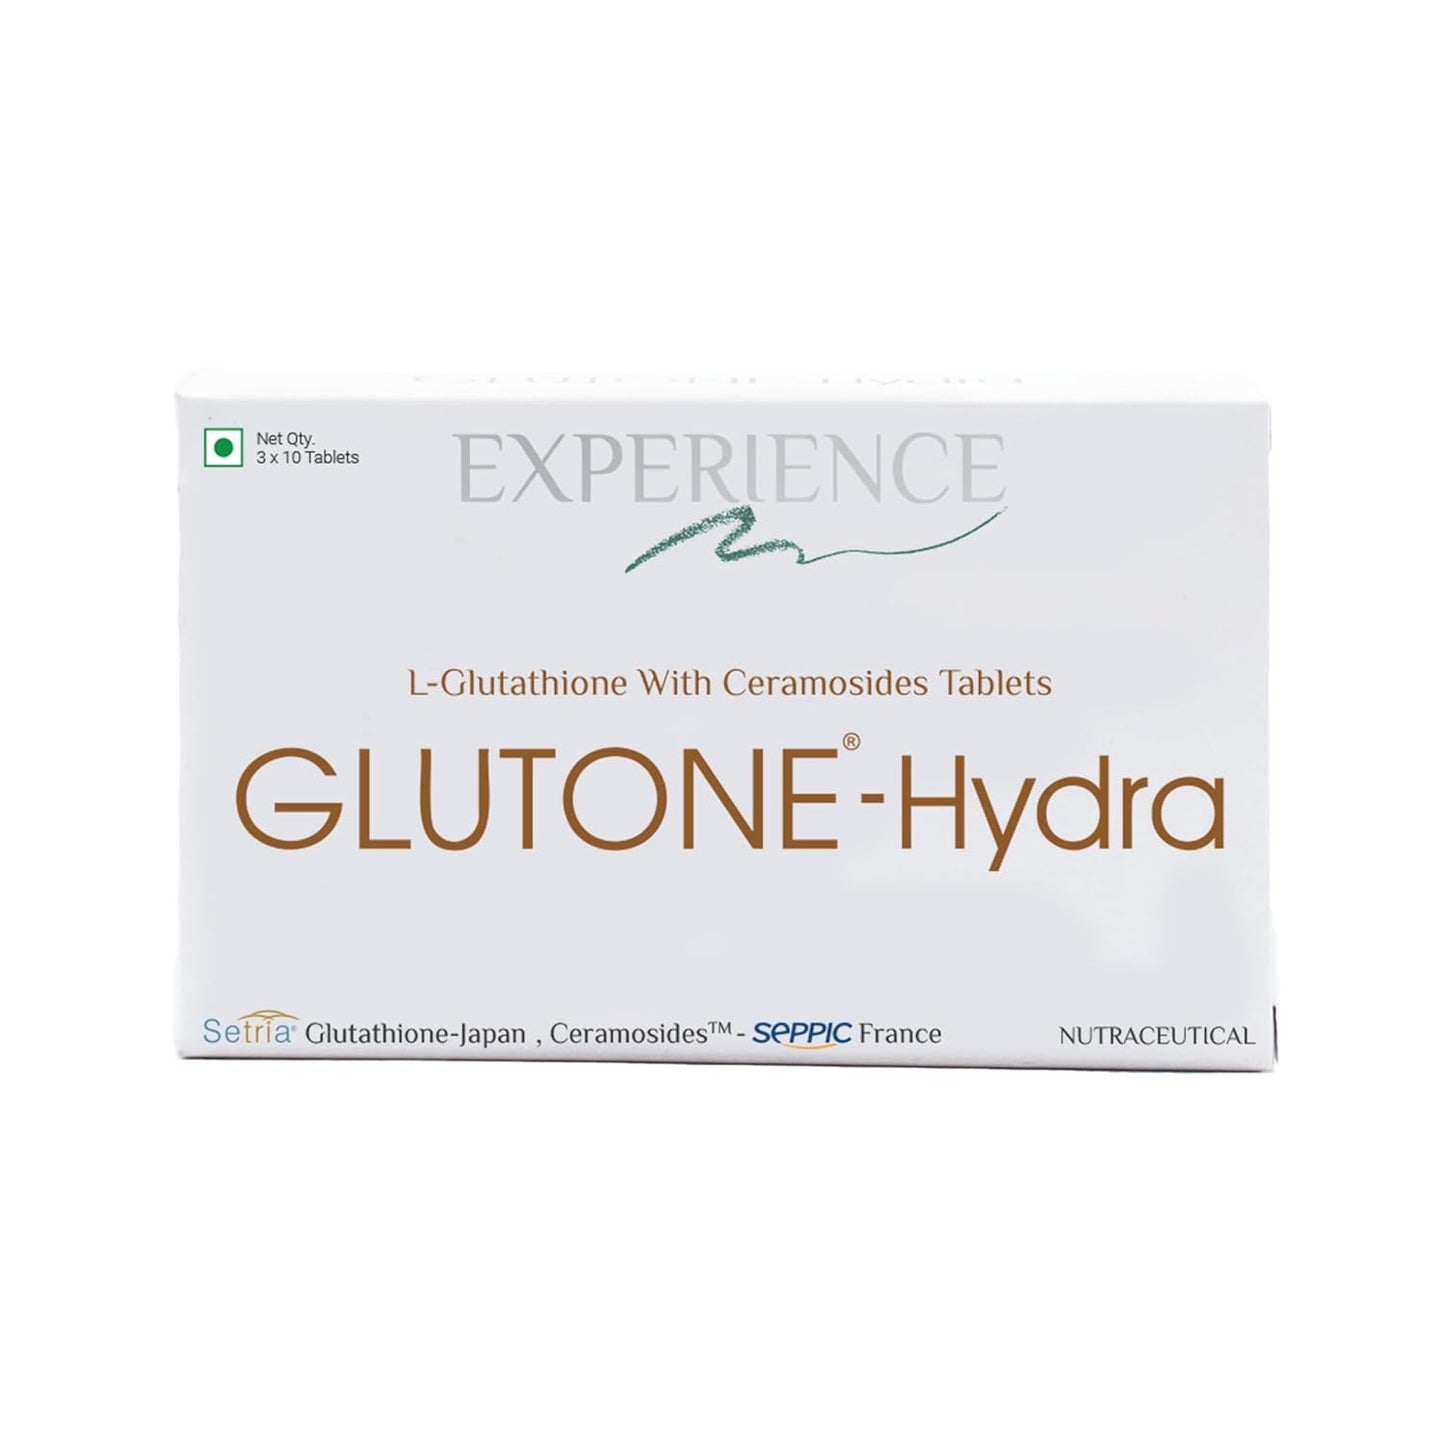 Glutone-Hydra | Setria Glutathione with Ceramosides Tablets for Dry Skin | For Glowing Hydrated Skin | Pack of 30 Tablets